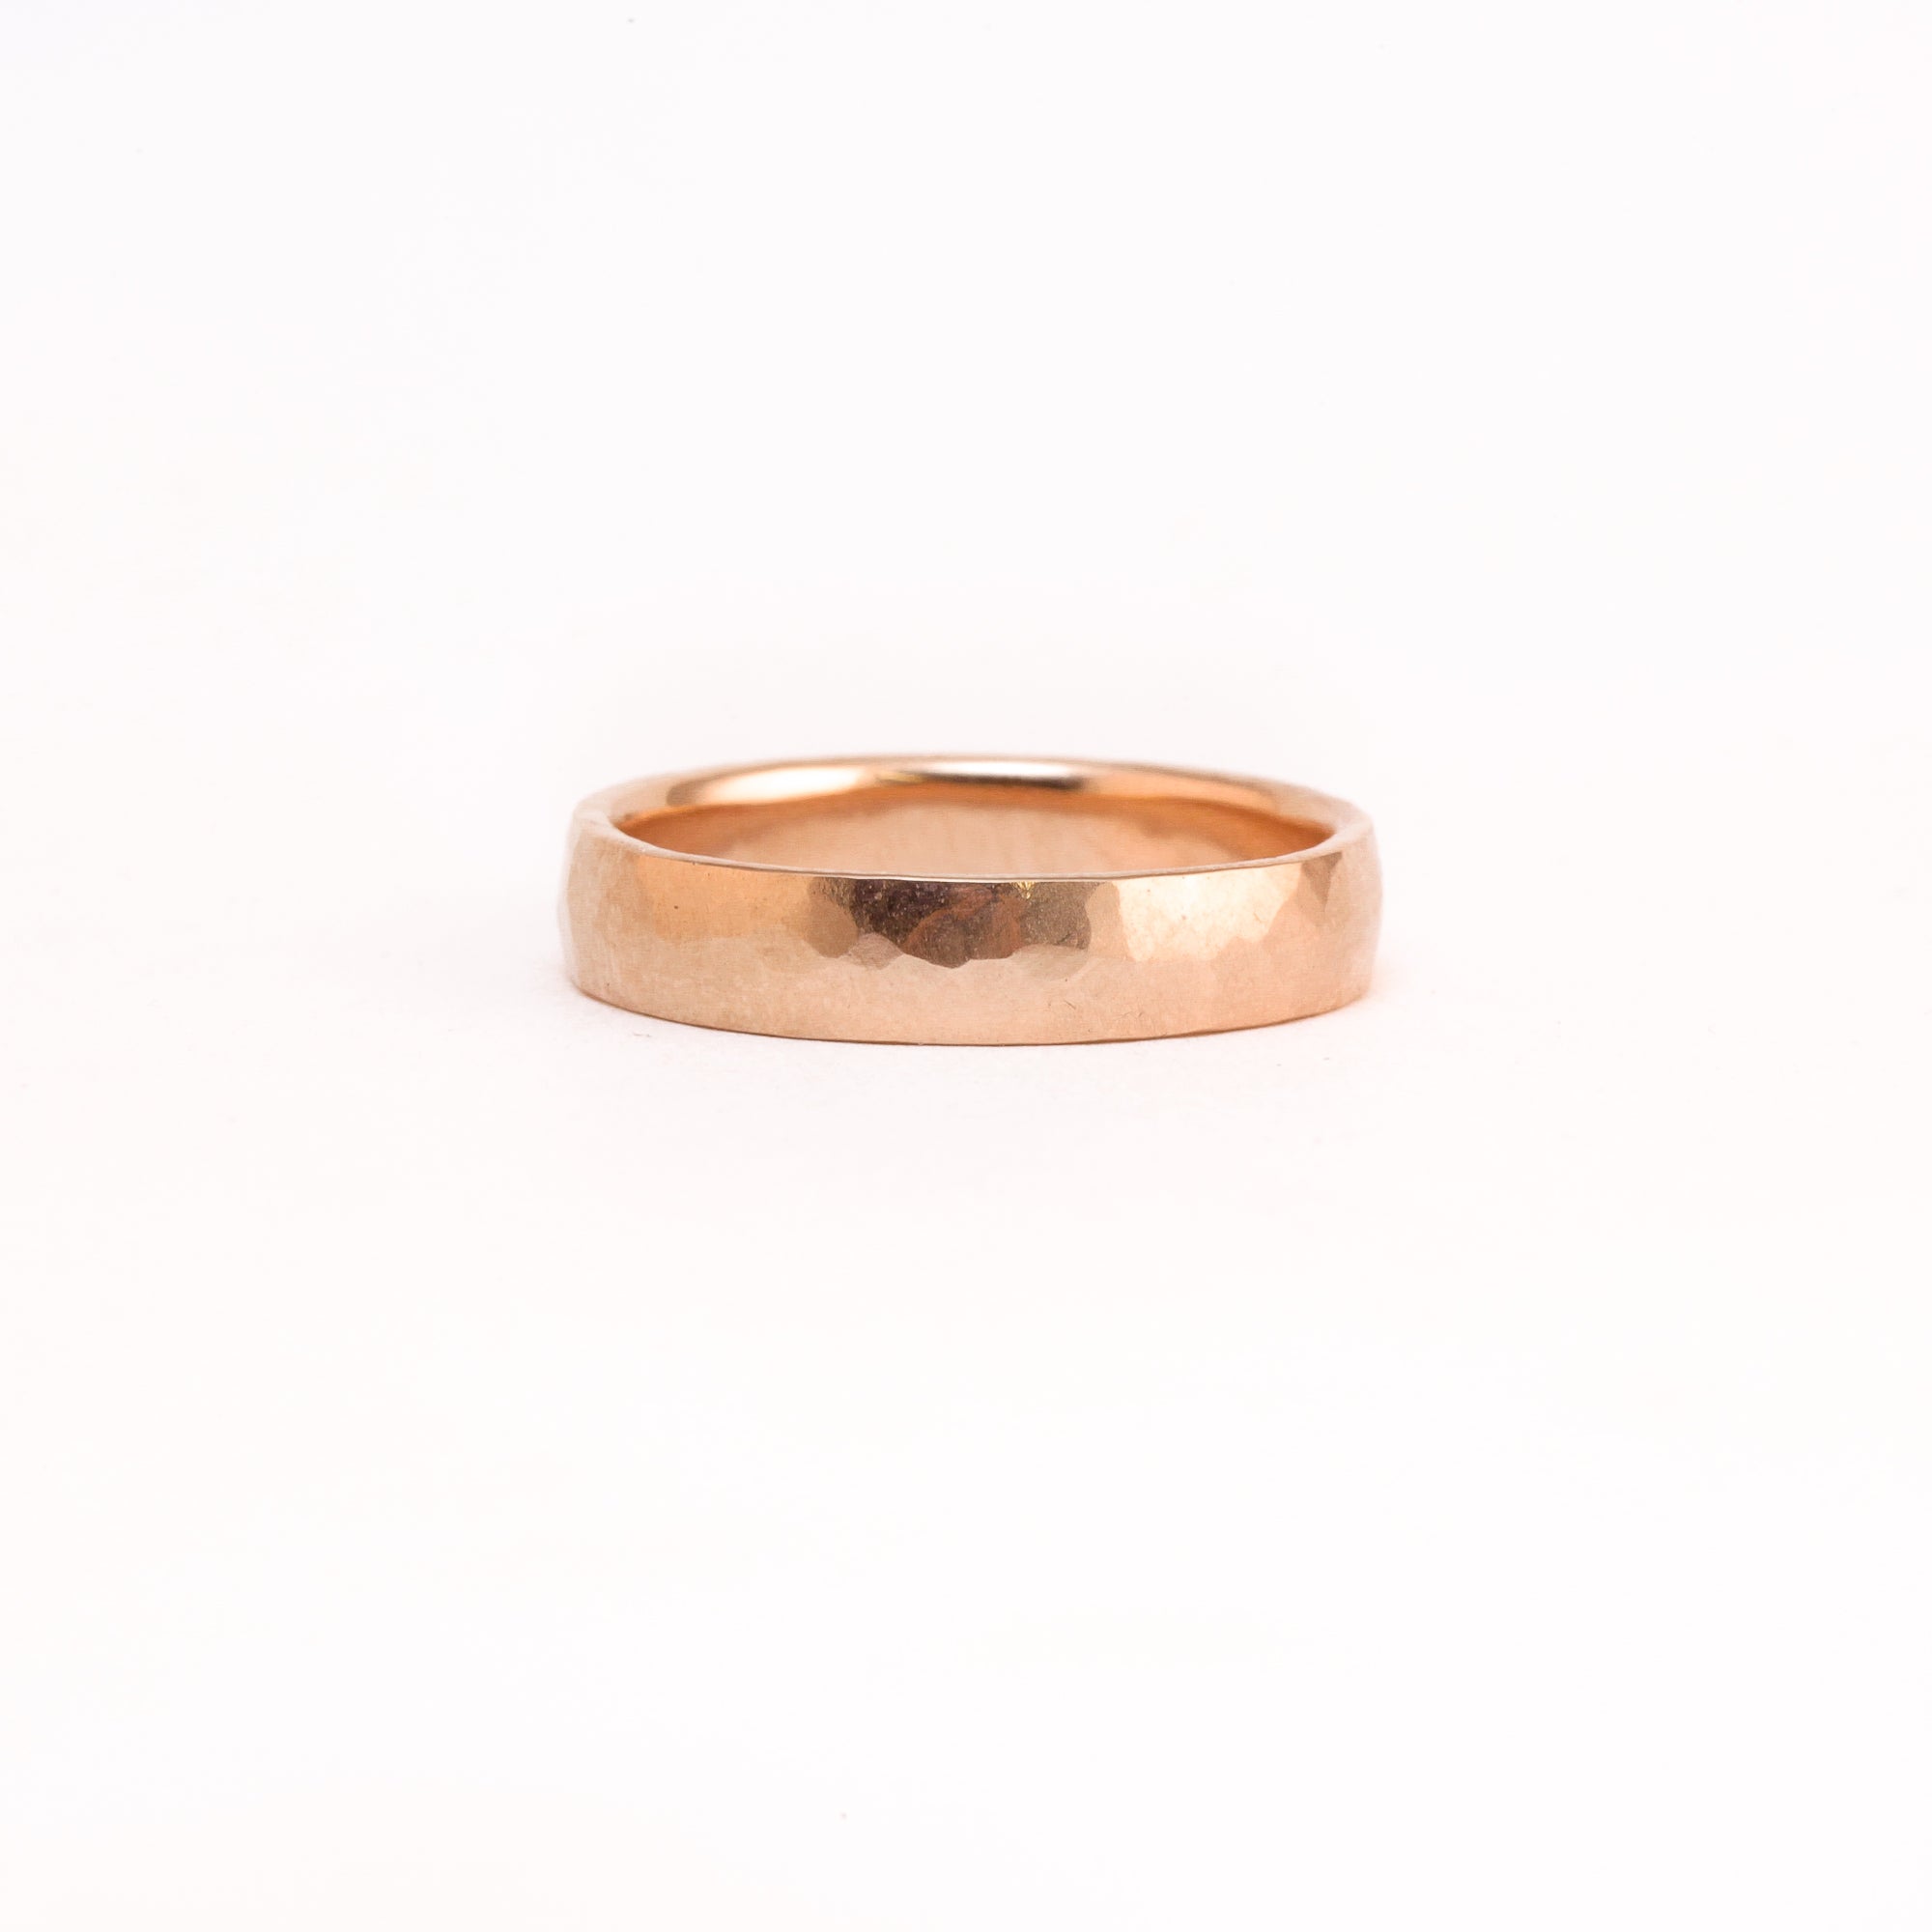 Wide 18ct rose gold hammered finished ring - made in Melbourne.